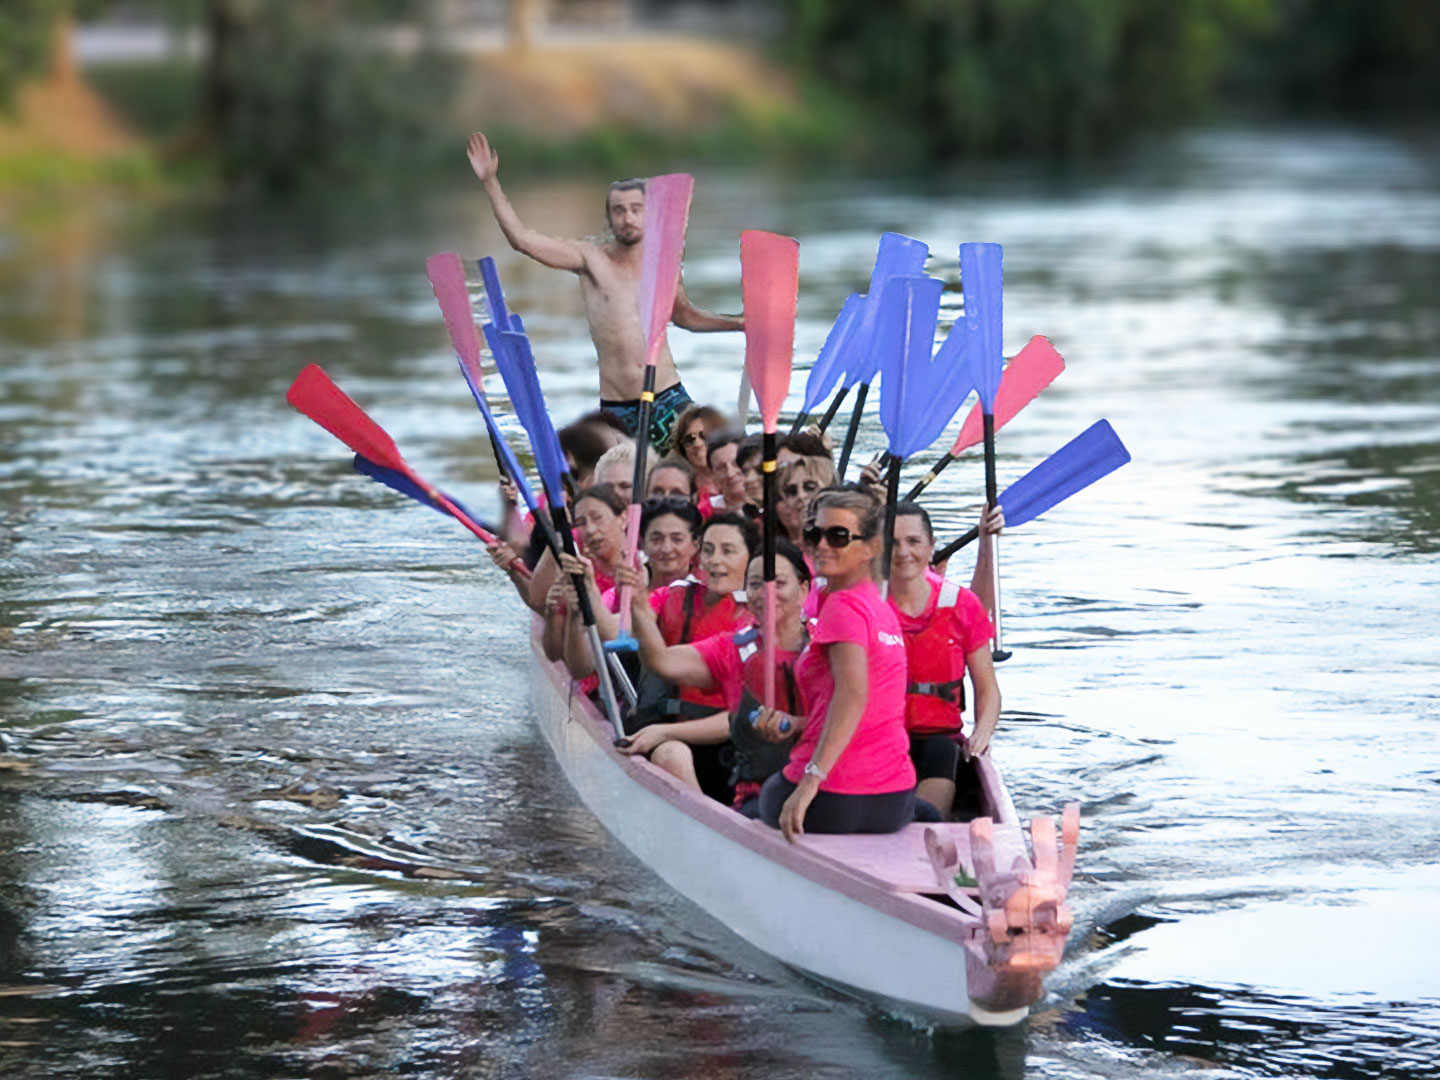 Canoa Club Sile - Donne in Rosa Treviso - Pink Dragon Sile